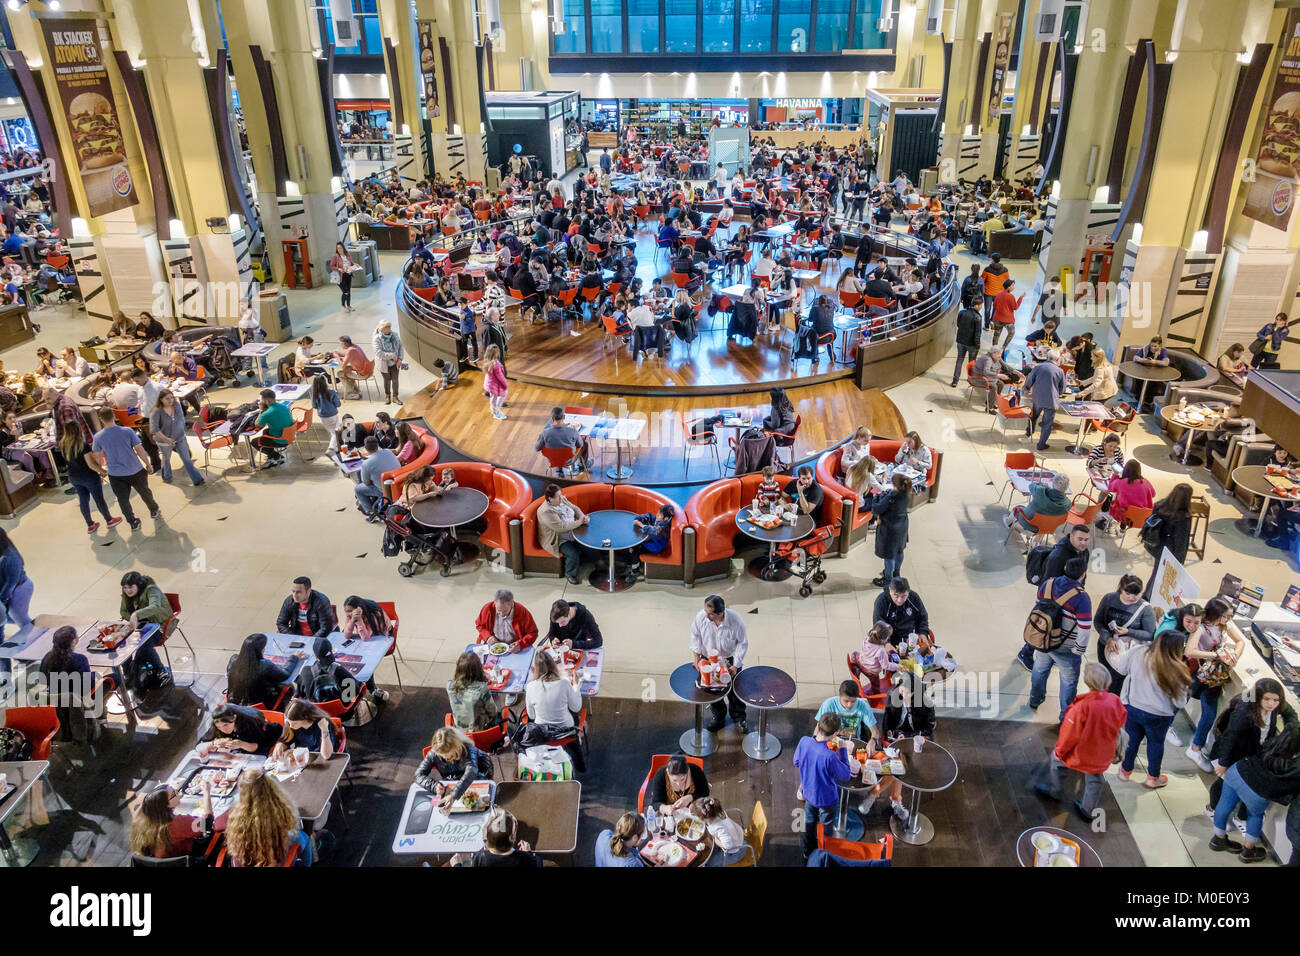 Buenos Aires Argentina,Abasto Shopping Mall,atrium,food court plaza,crowded,overhead view,families,restaurant restaurants food dining cafe cafes,seati Stock Photo